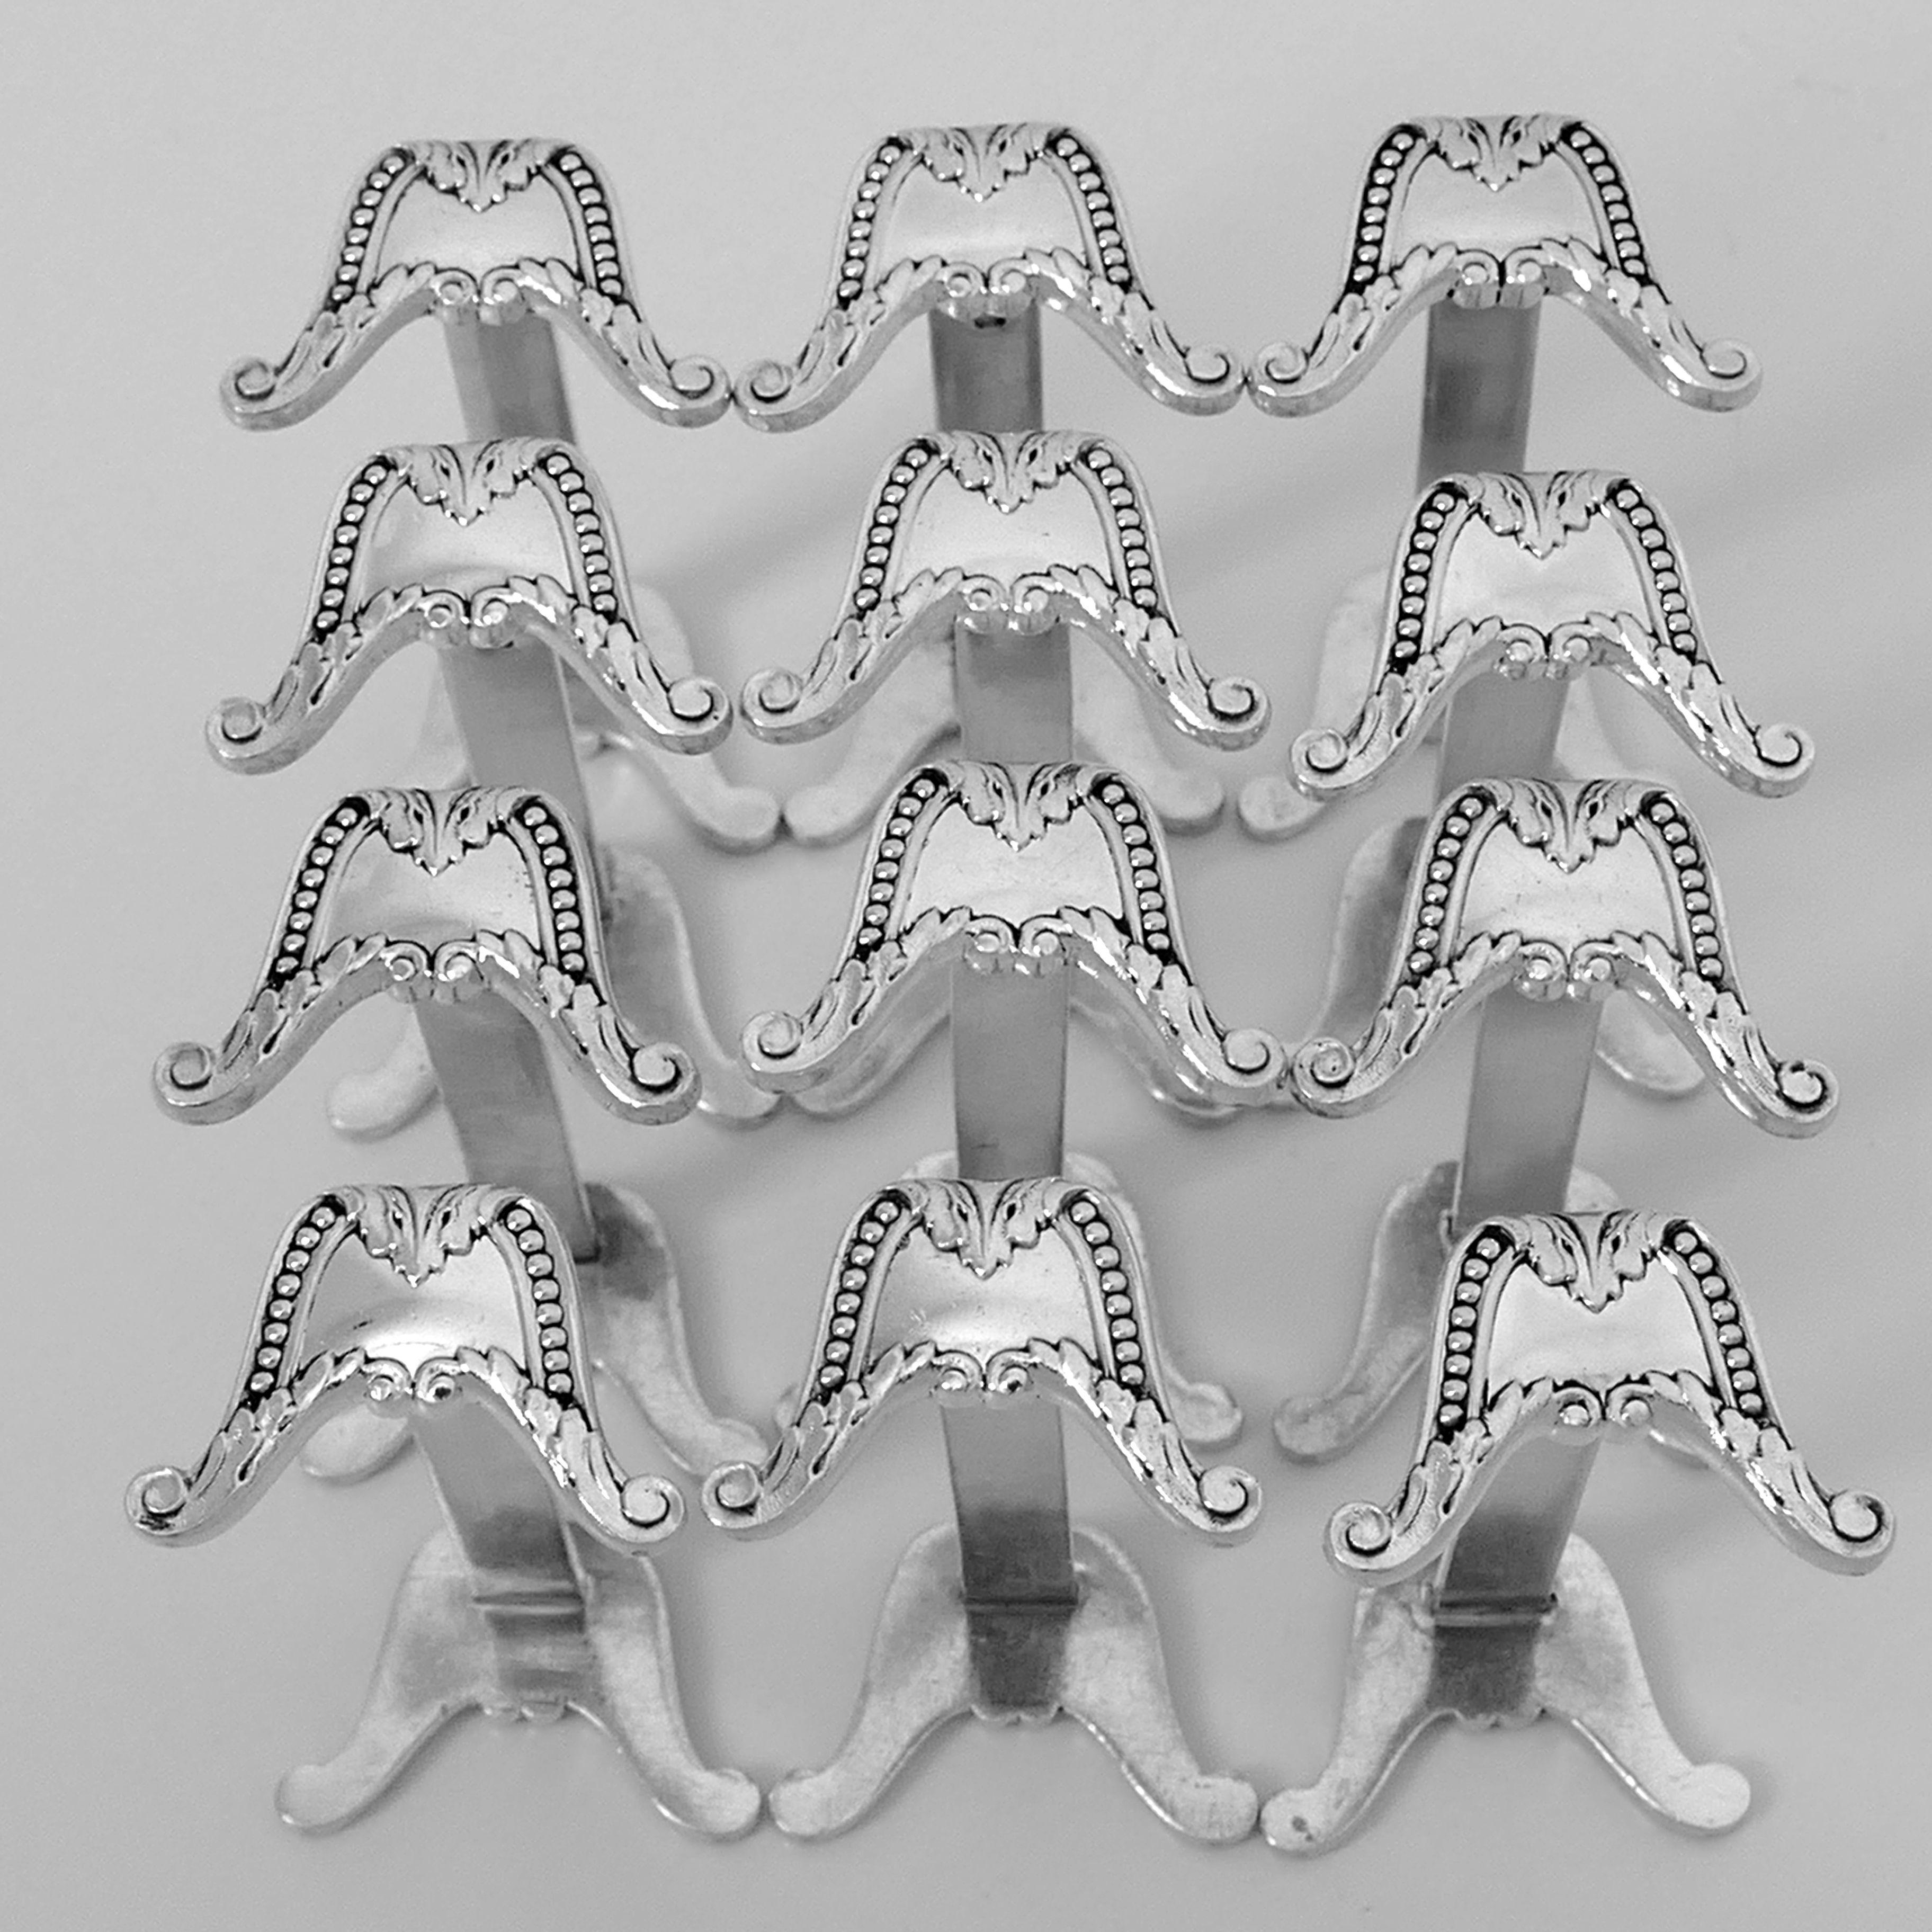 Christofle Rare French All Sterling Silver Knife Rests Set 12 Pc, Neoclassical 4